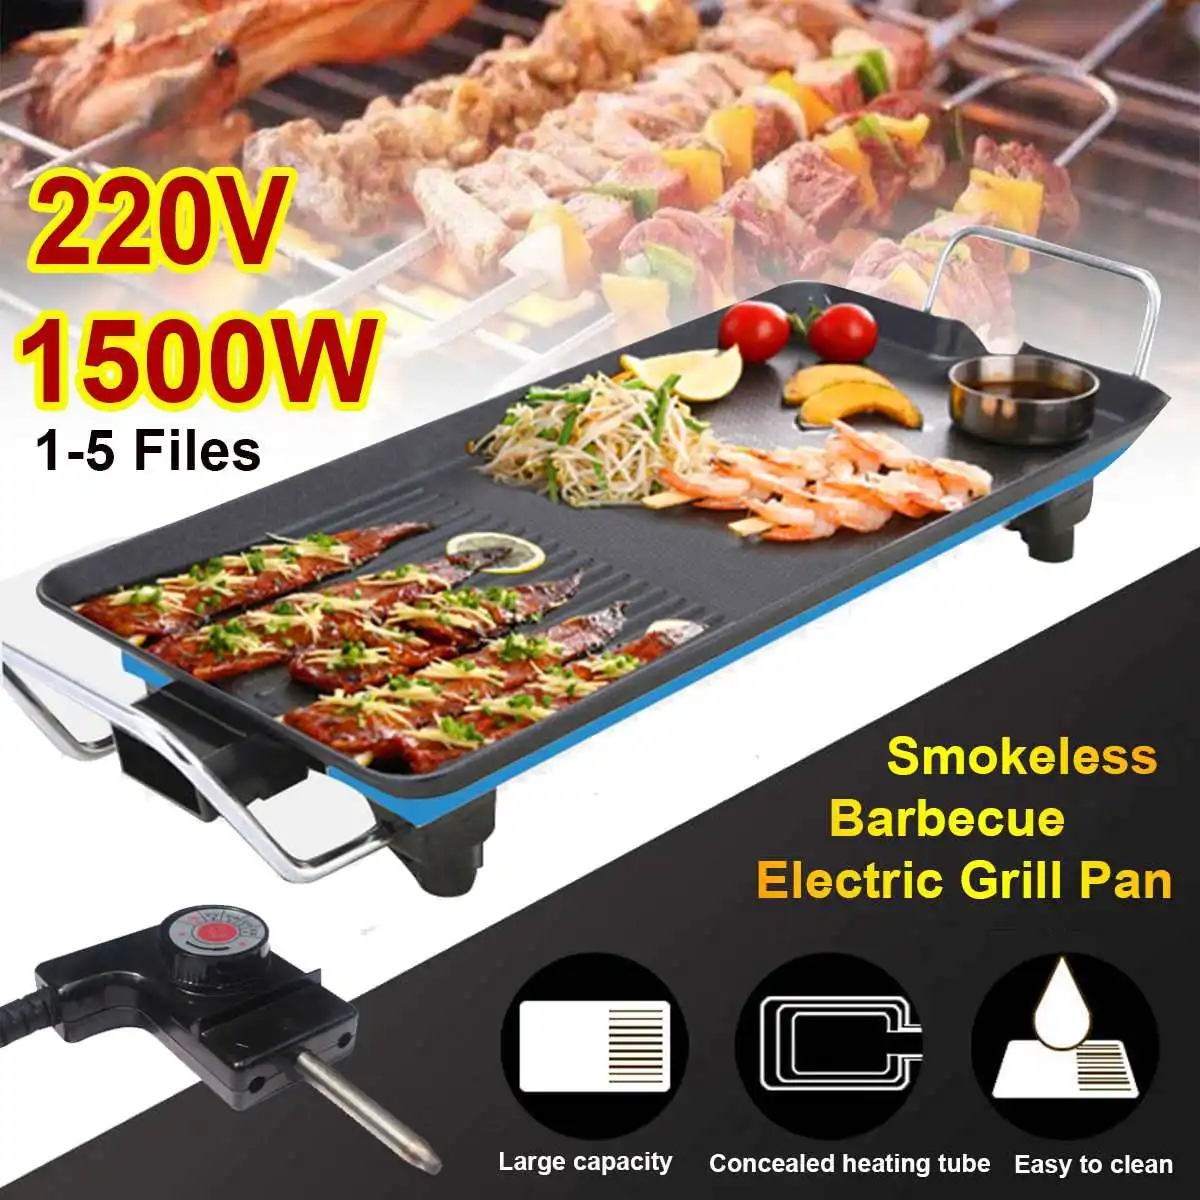 5 Gear Temperature 1500W Teppanyaki Grill Pan Smokeless Electric Grill Easy Clean BBQ Barbecue Grill for Party Camping Festival Cooking M 36x21cm Non-Stick Hot Plate 